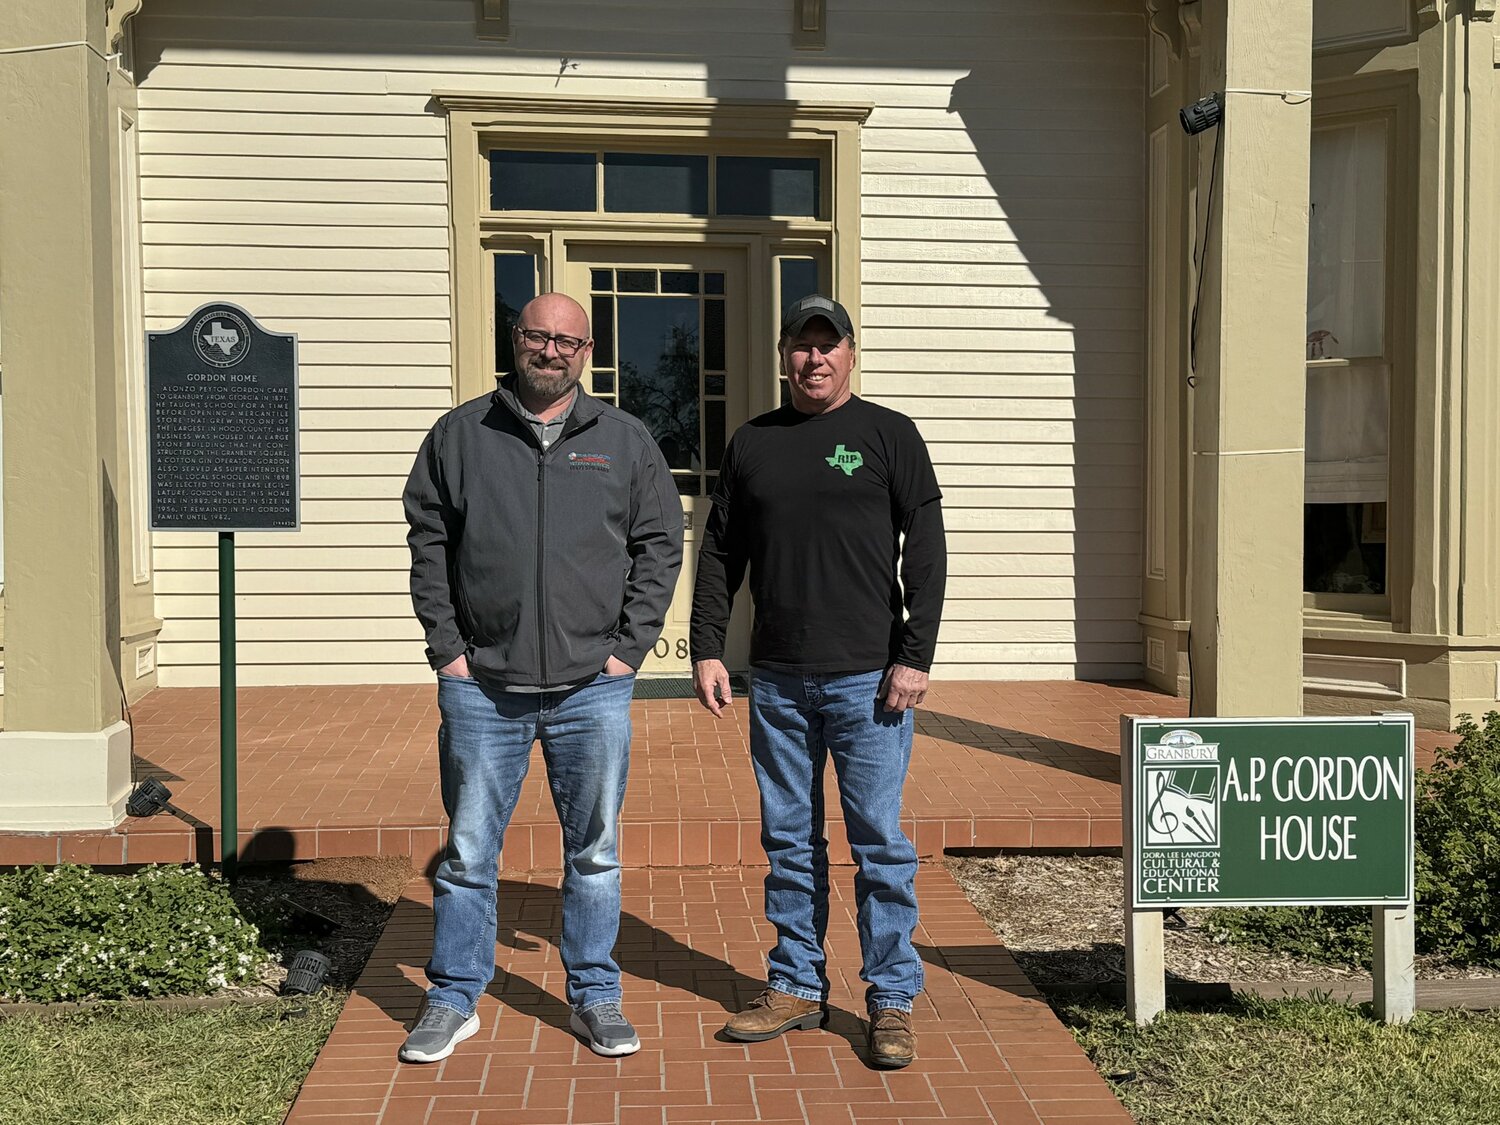 Joshua Morrison, left, and Greg Stephens, right, will be investigating The Gordon House for any paranormal occurrences on Saturday, Nov. 11. Proceeds from the ghost hunt will benefit the Pecan Valley Centers for Behavioral & Developmental Healthcare.